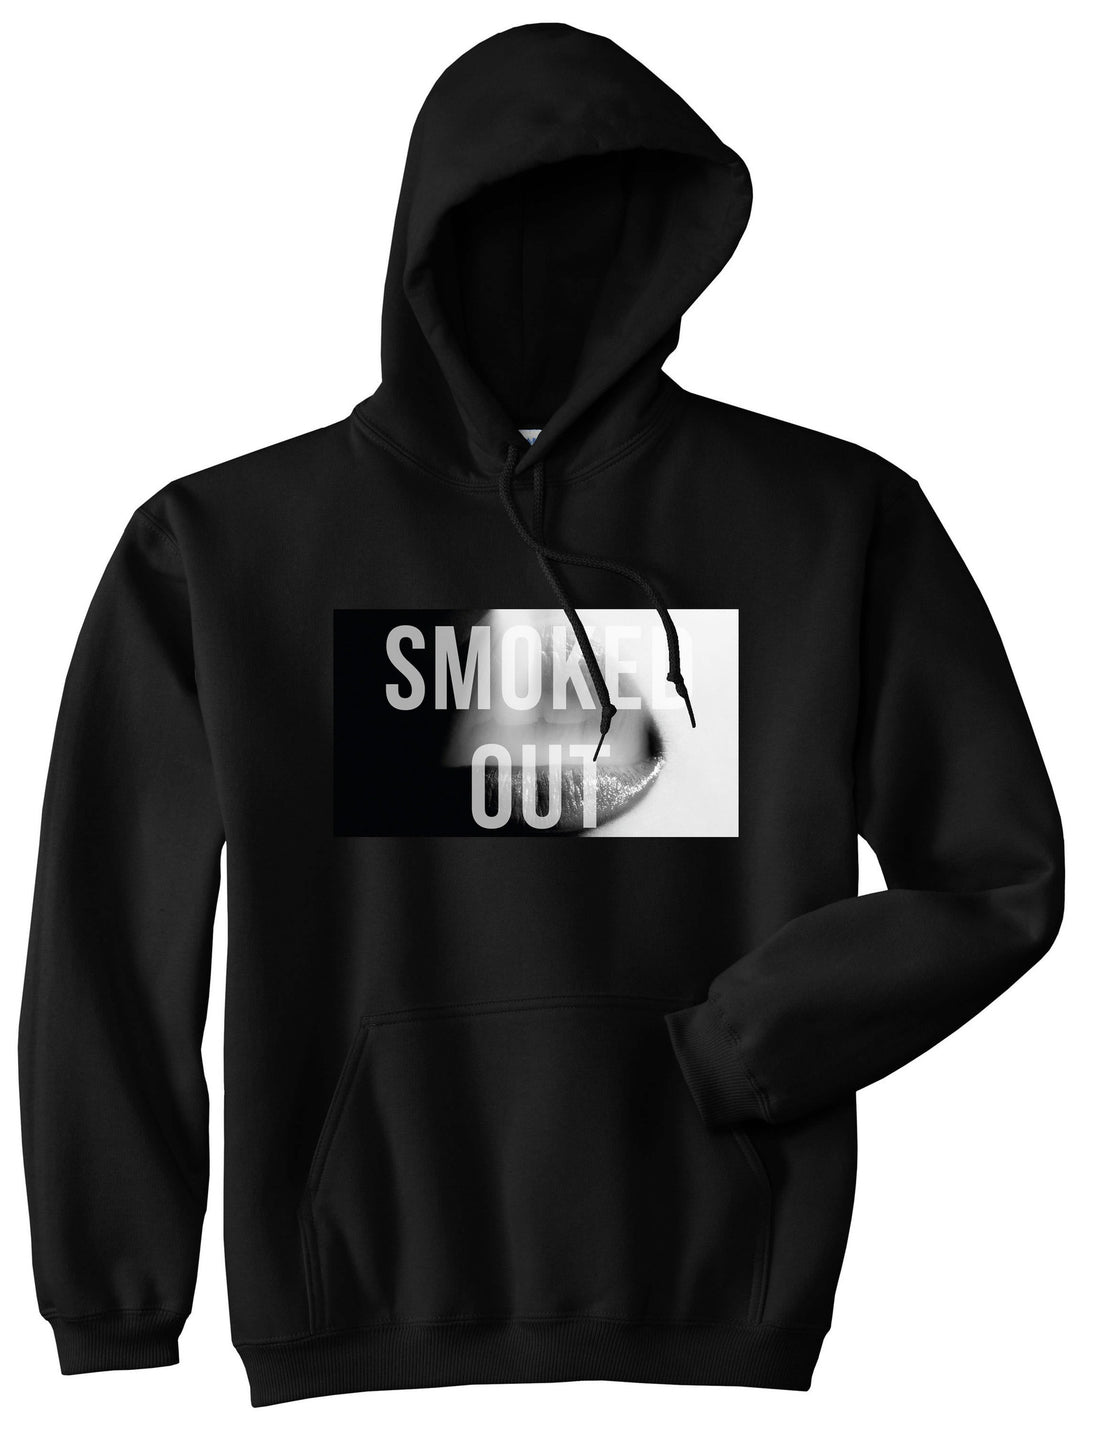 Smoked Out Weed Marijuana Girls Pot New York Pullover Hoodie Hoody In Black by Kings Of NY